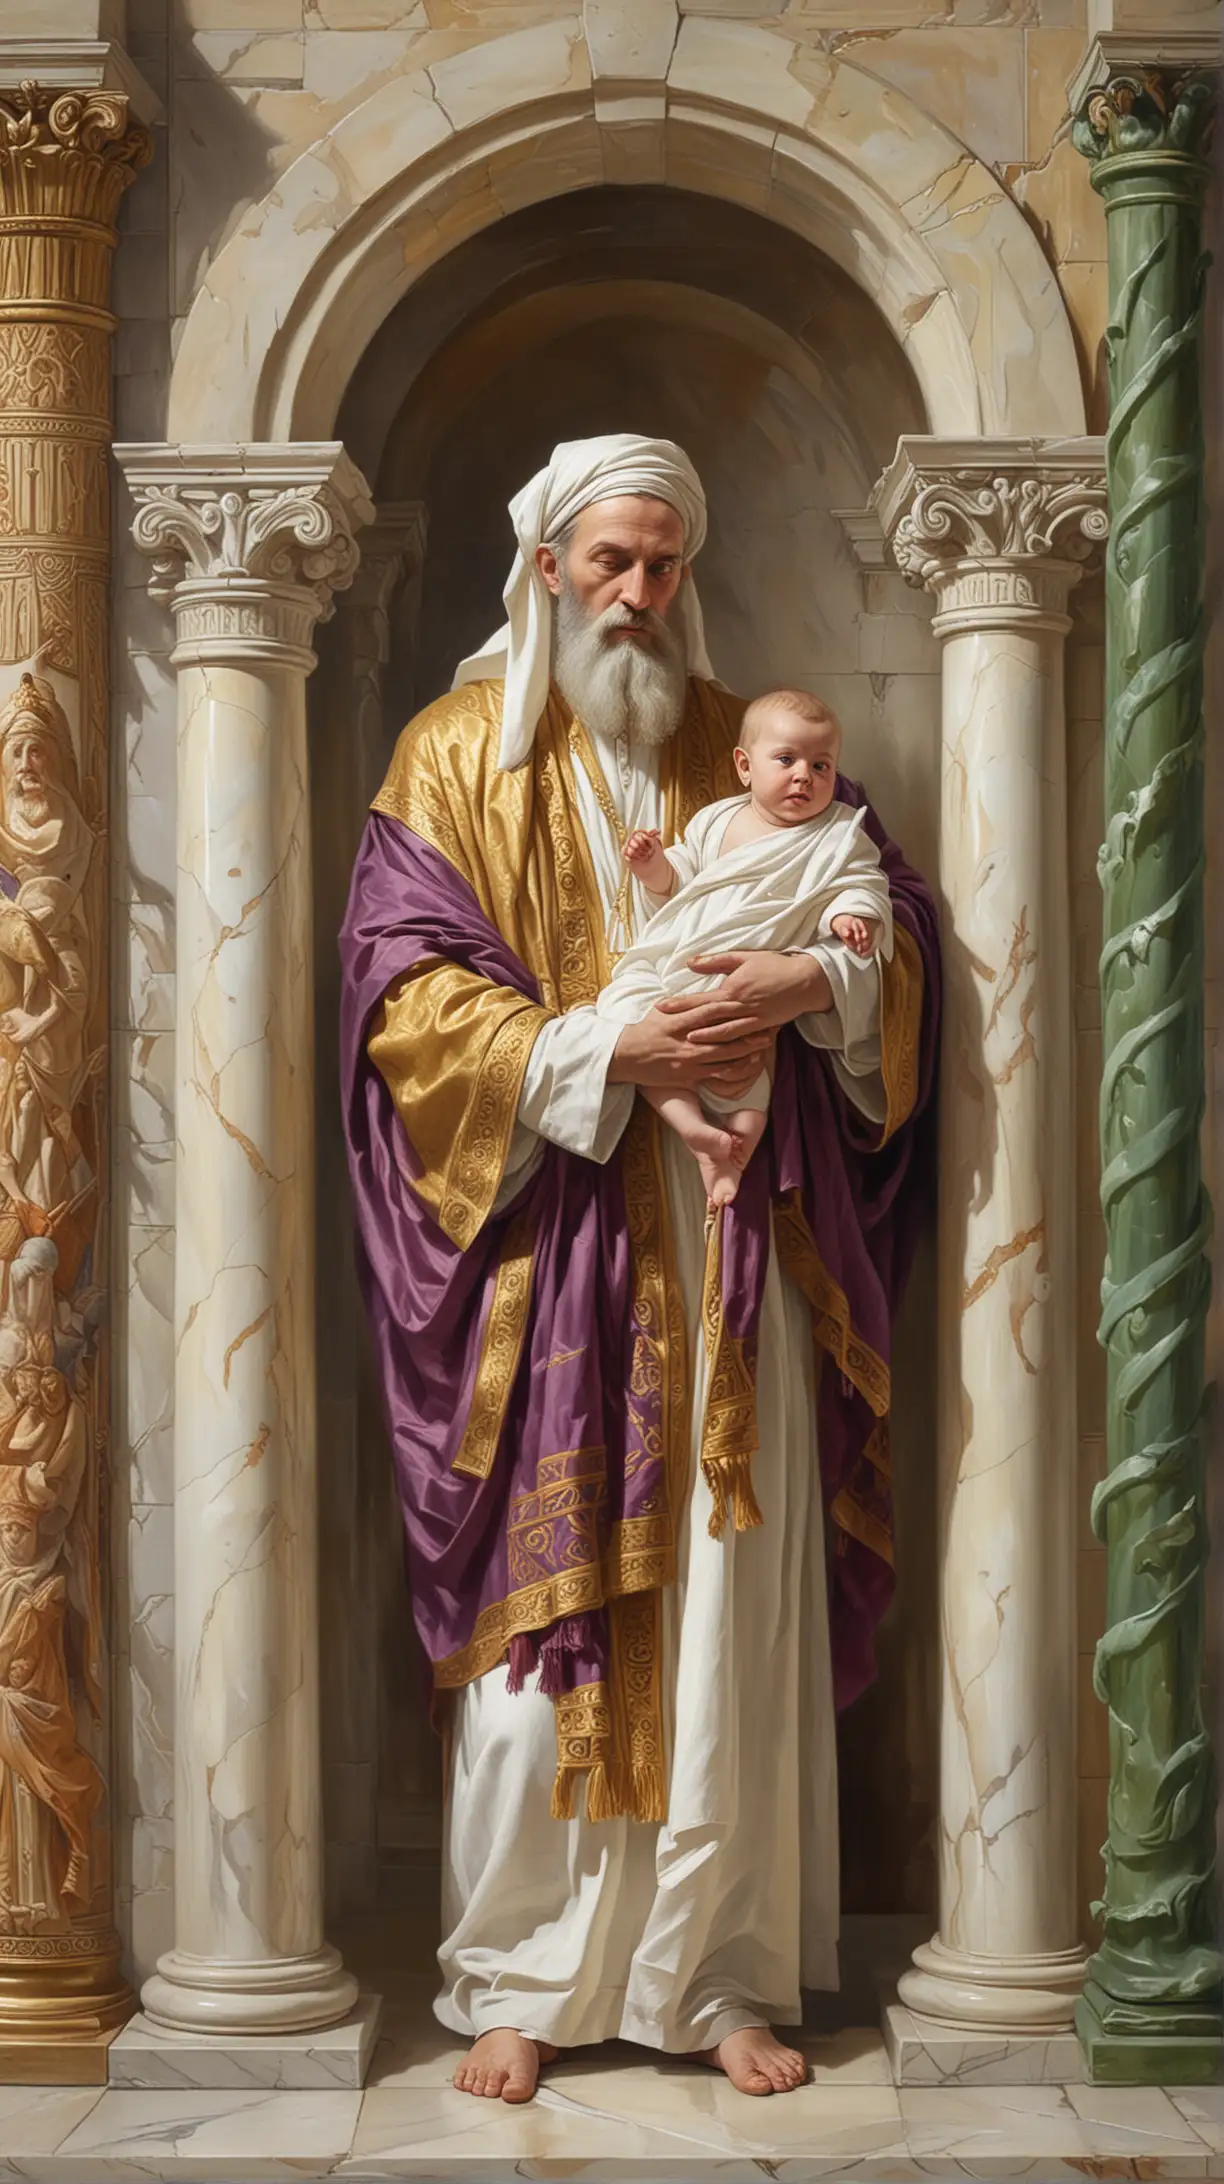 The painting depicts the Jewish high-priest Simeon at the presentation of the naked baby Jesus in the temple. The scene is set within the temple, suggested by the arched stone doorway and the polished marble walls and columns.

Central Figure
The Jewish high-priest Simeon: We are seeing the Jewish High-priest Simeon dressed in full rich Jewish liturgy vestments in lively colours purple and beige, from the side.  He is holding the naked baby Jesus in his arms.

Additional Details: 
The Temple Setting: The temple walls and columns are in polished white marble.  There is a green curtain hanging from the columns.  The background features an open space with cloudy sky and houses in the background. The saturated tones of the painting and the play of light and shadow create a sense of excitement.
Symbolism:  The cloth in which the Jewish High-priest Simeon holds the naked baby Jesus is white. The white symbolizes purification.
Overall Impression:
The painting captures the emotional intensity and spiritual significance of the subject The expression of the figure, the symbolism, and the setting all contribute to a powerful depiction of this pivotal event.